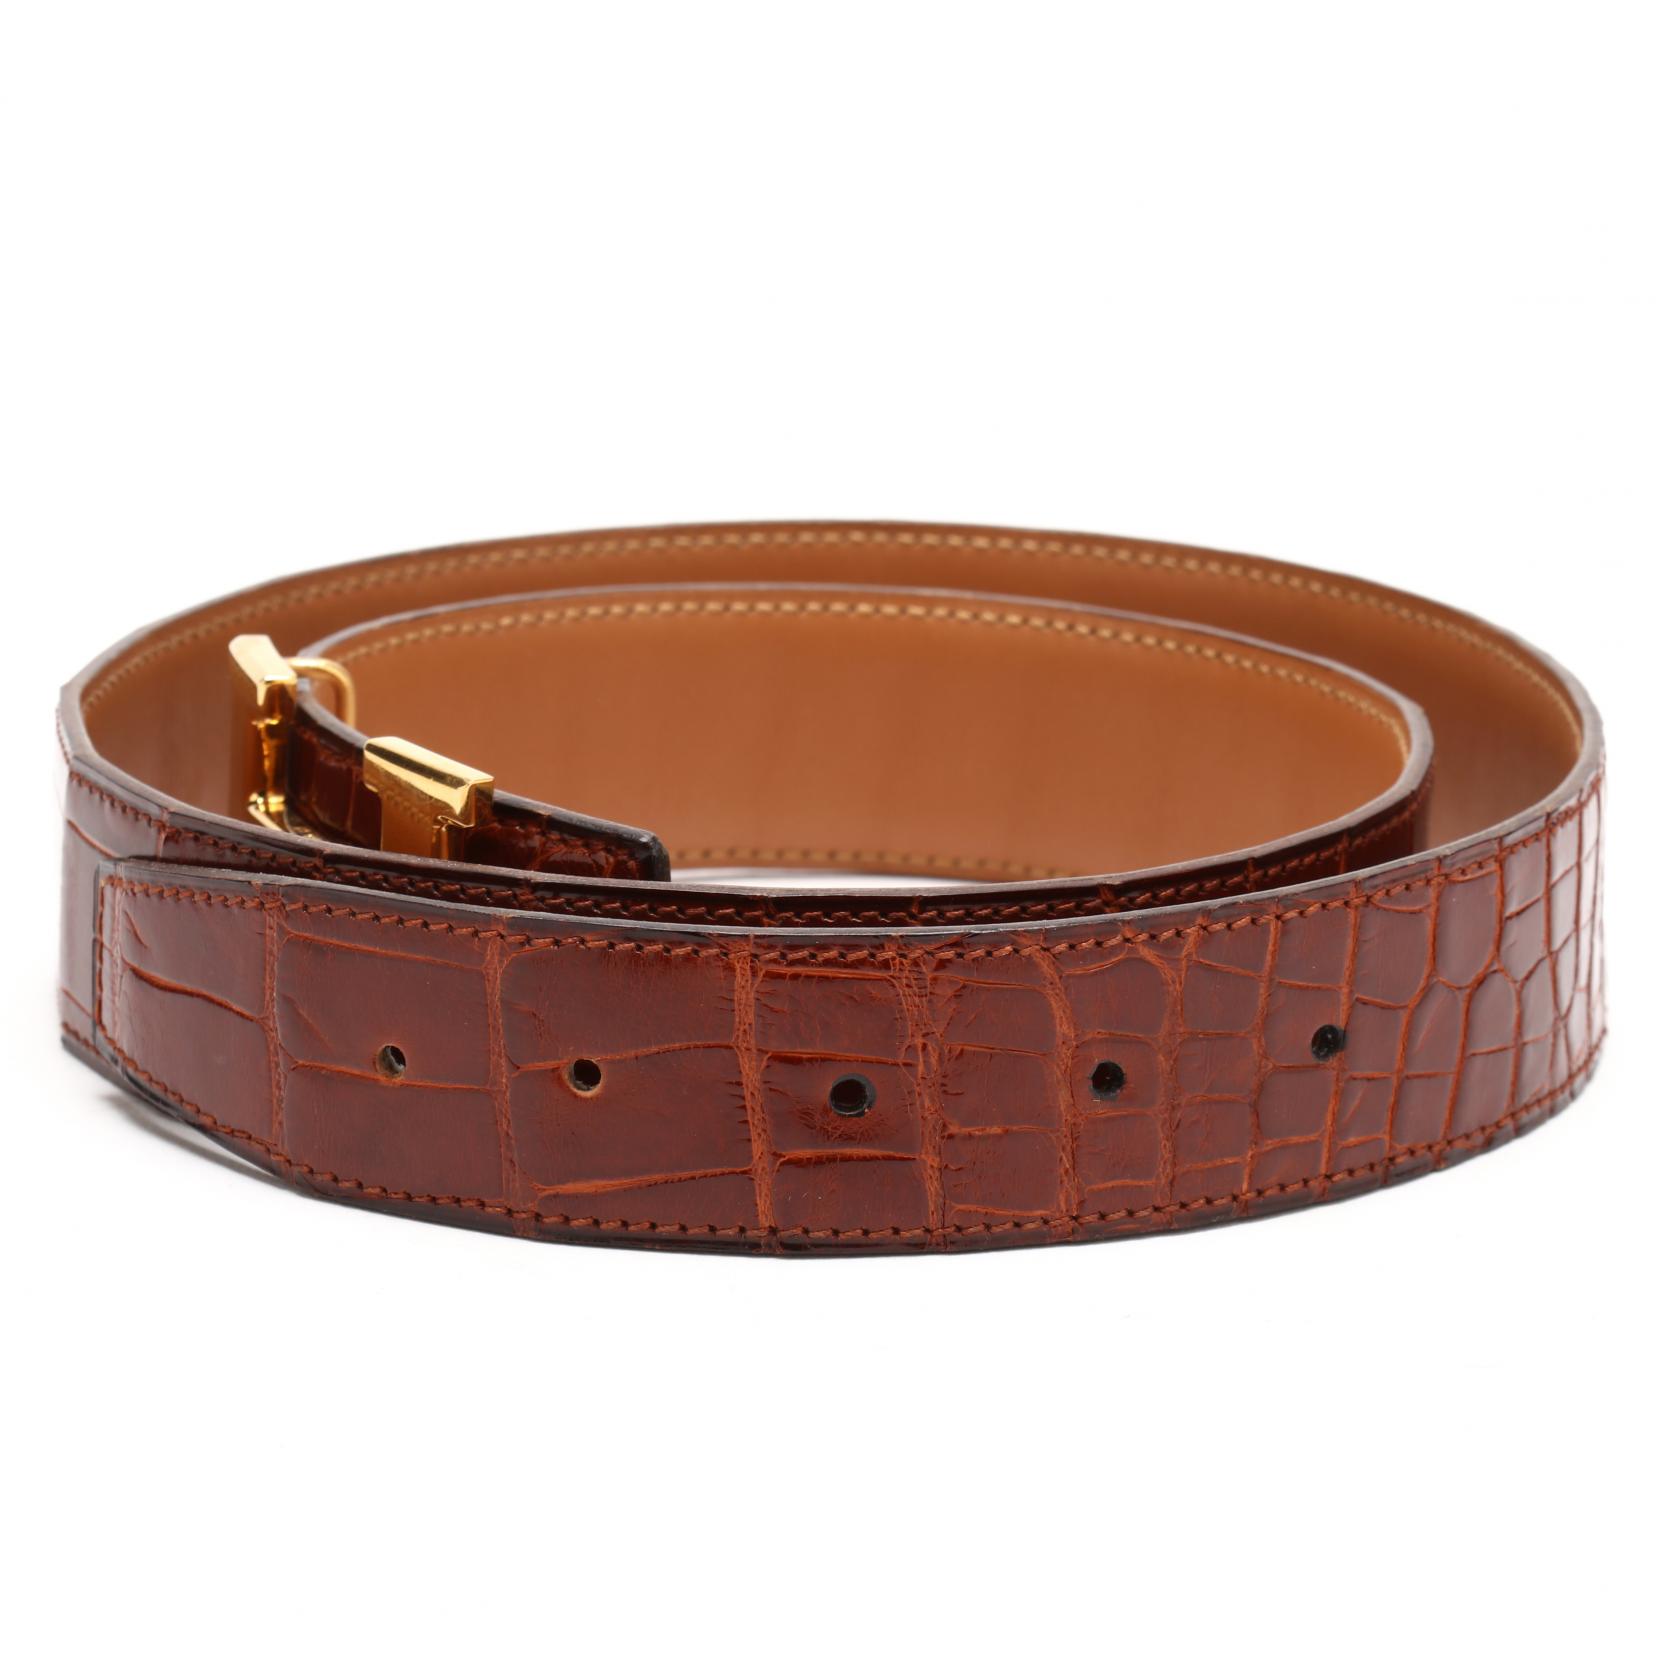 Sold at Auction: HERMES 'CONSTANCE' OSTRICH LEATHER BELT